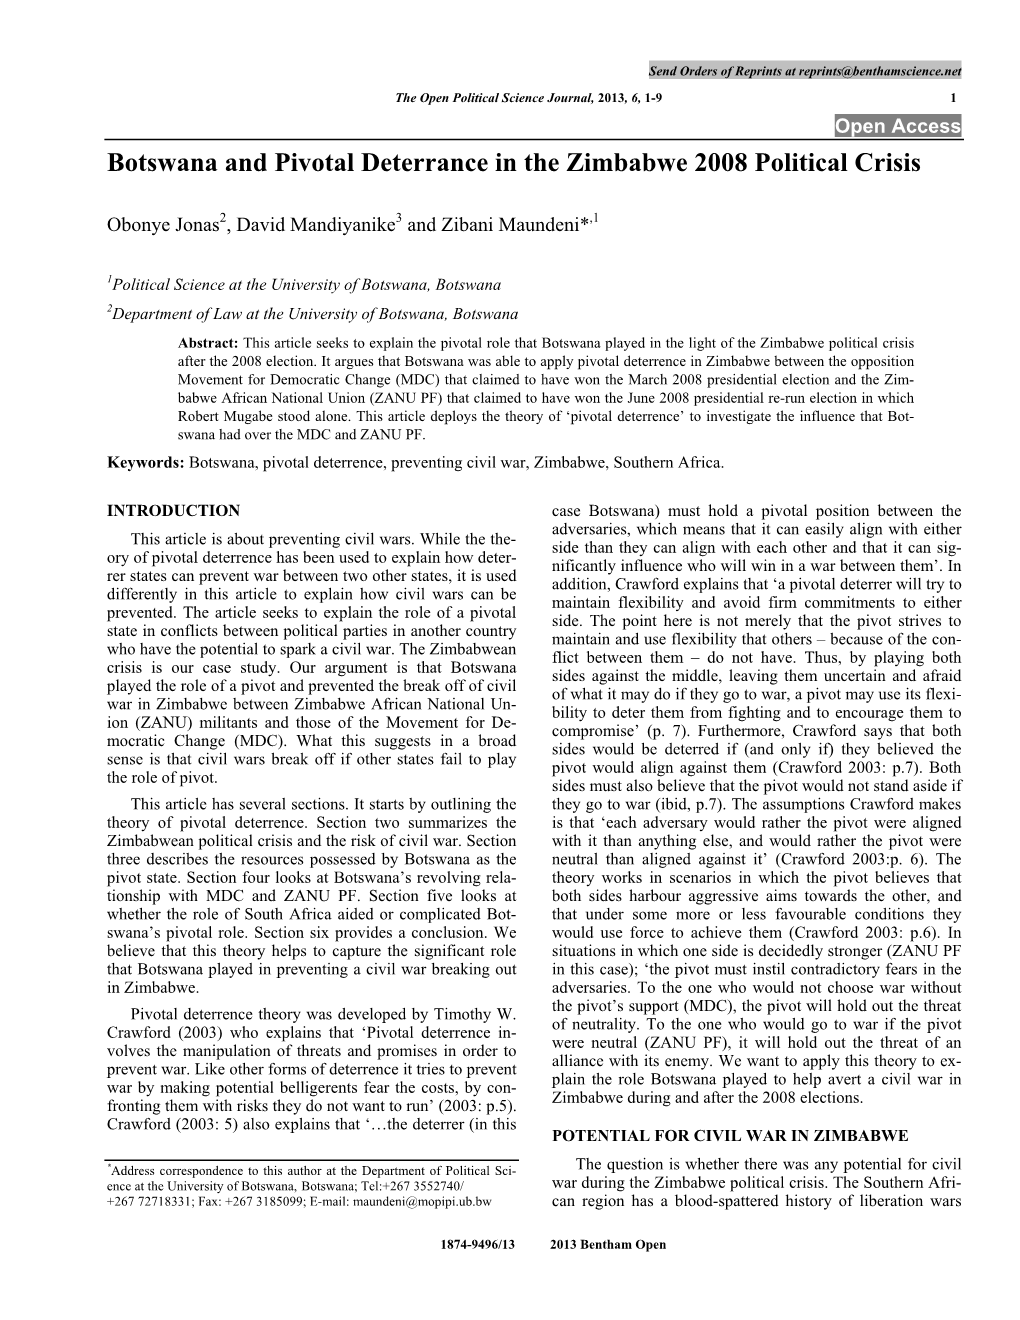 Botswana and Pivotal Deterrance in the Zimbabwe 2008 Political Crisis